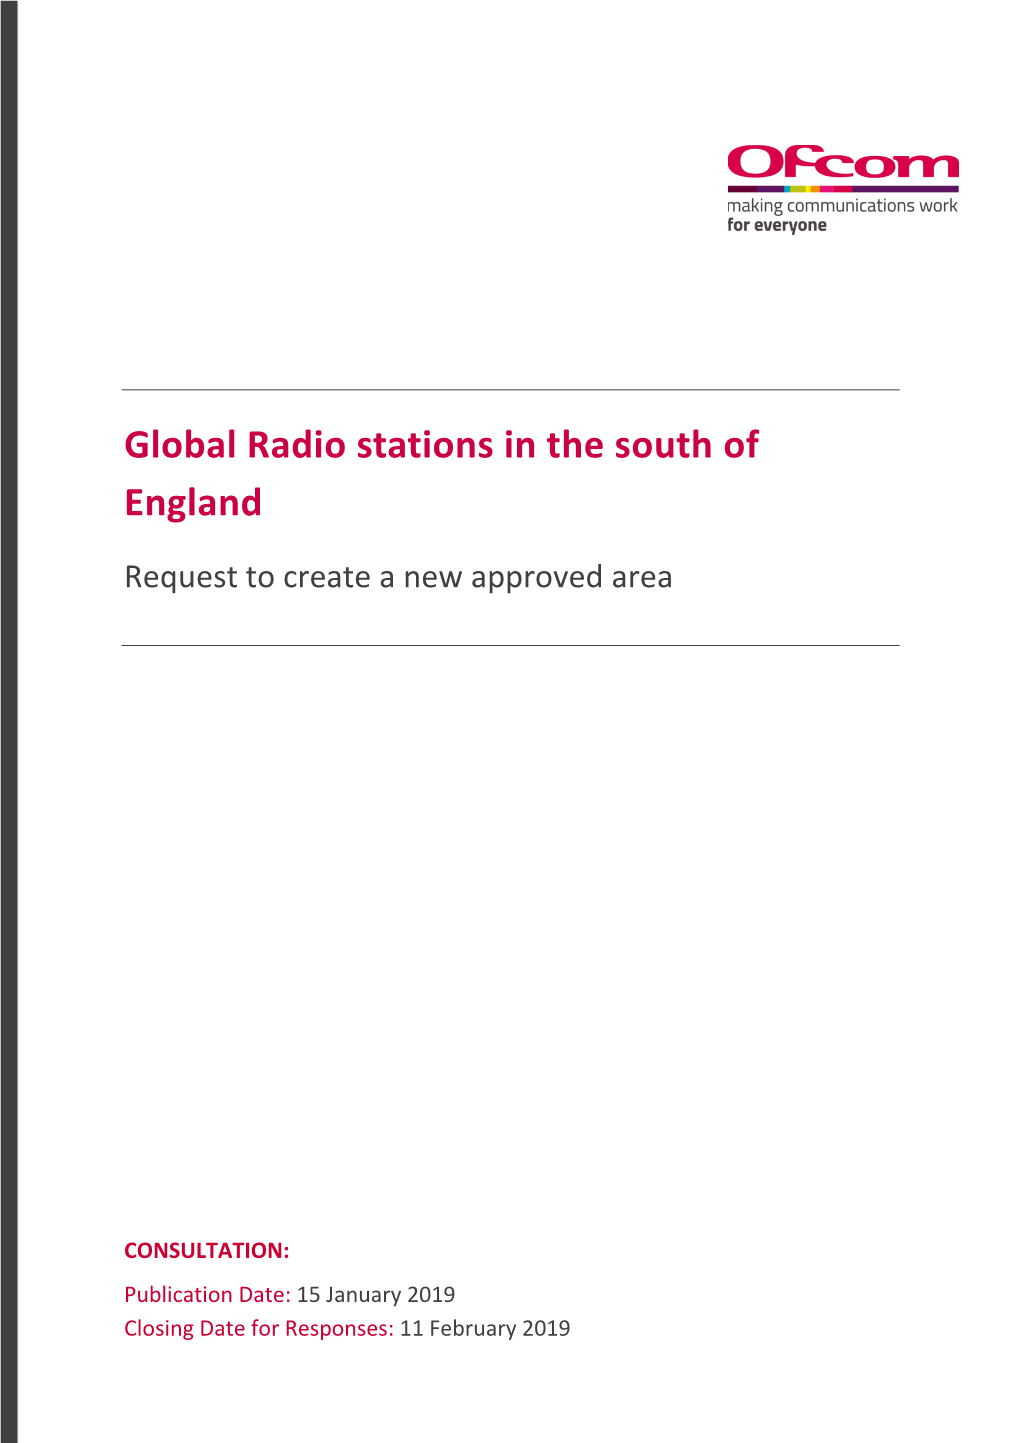 Global Radio Stations in the South of England